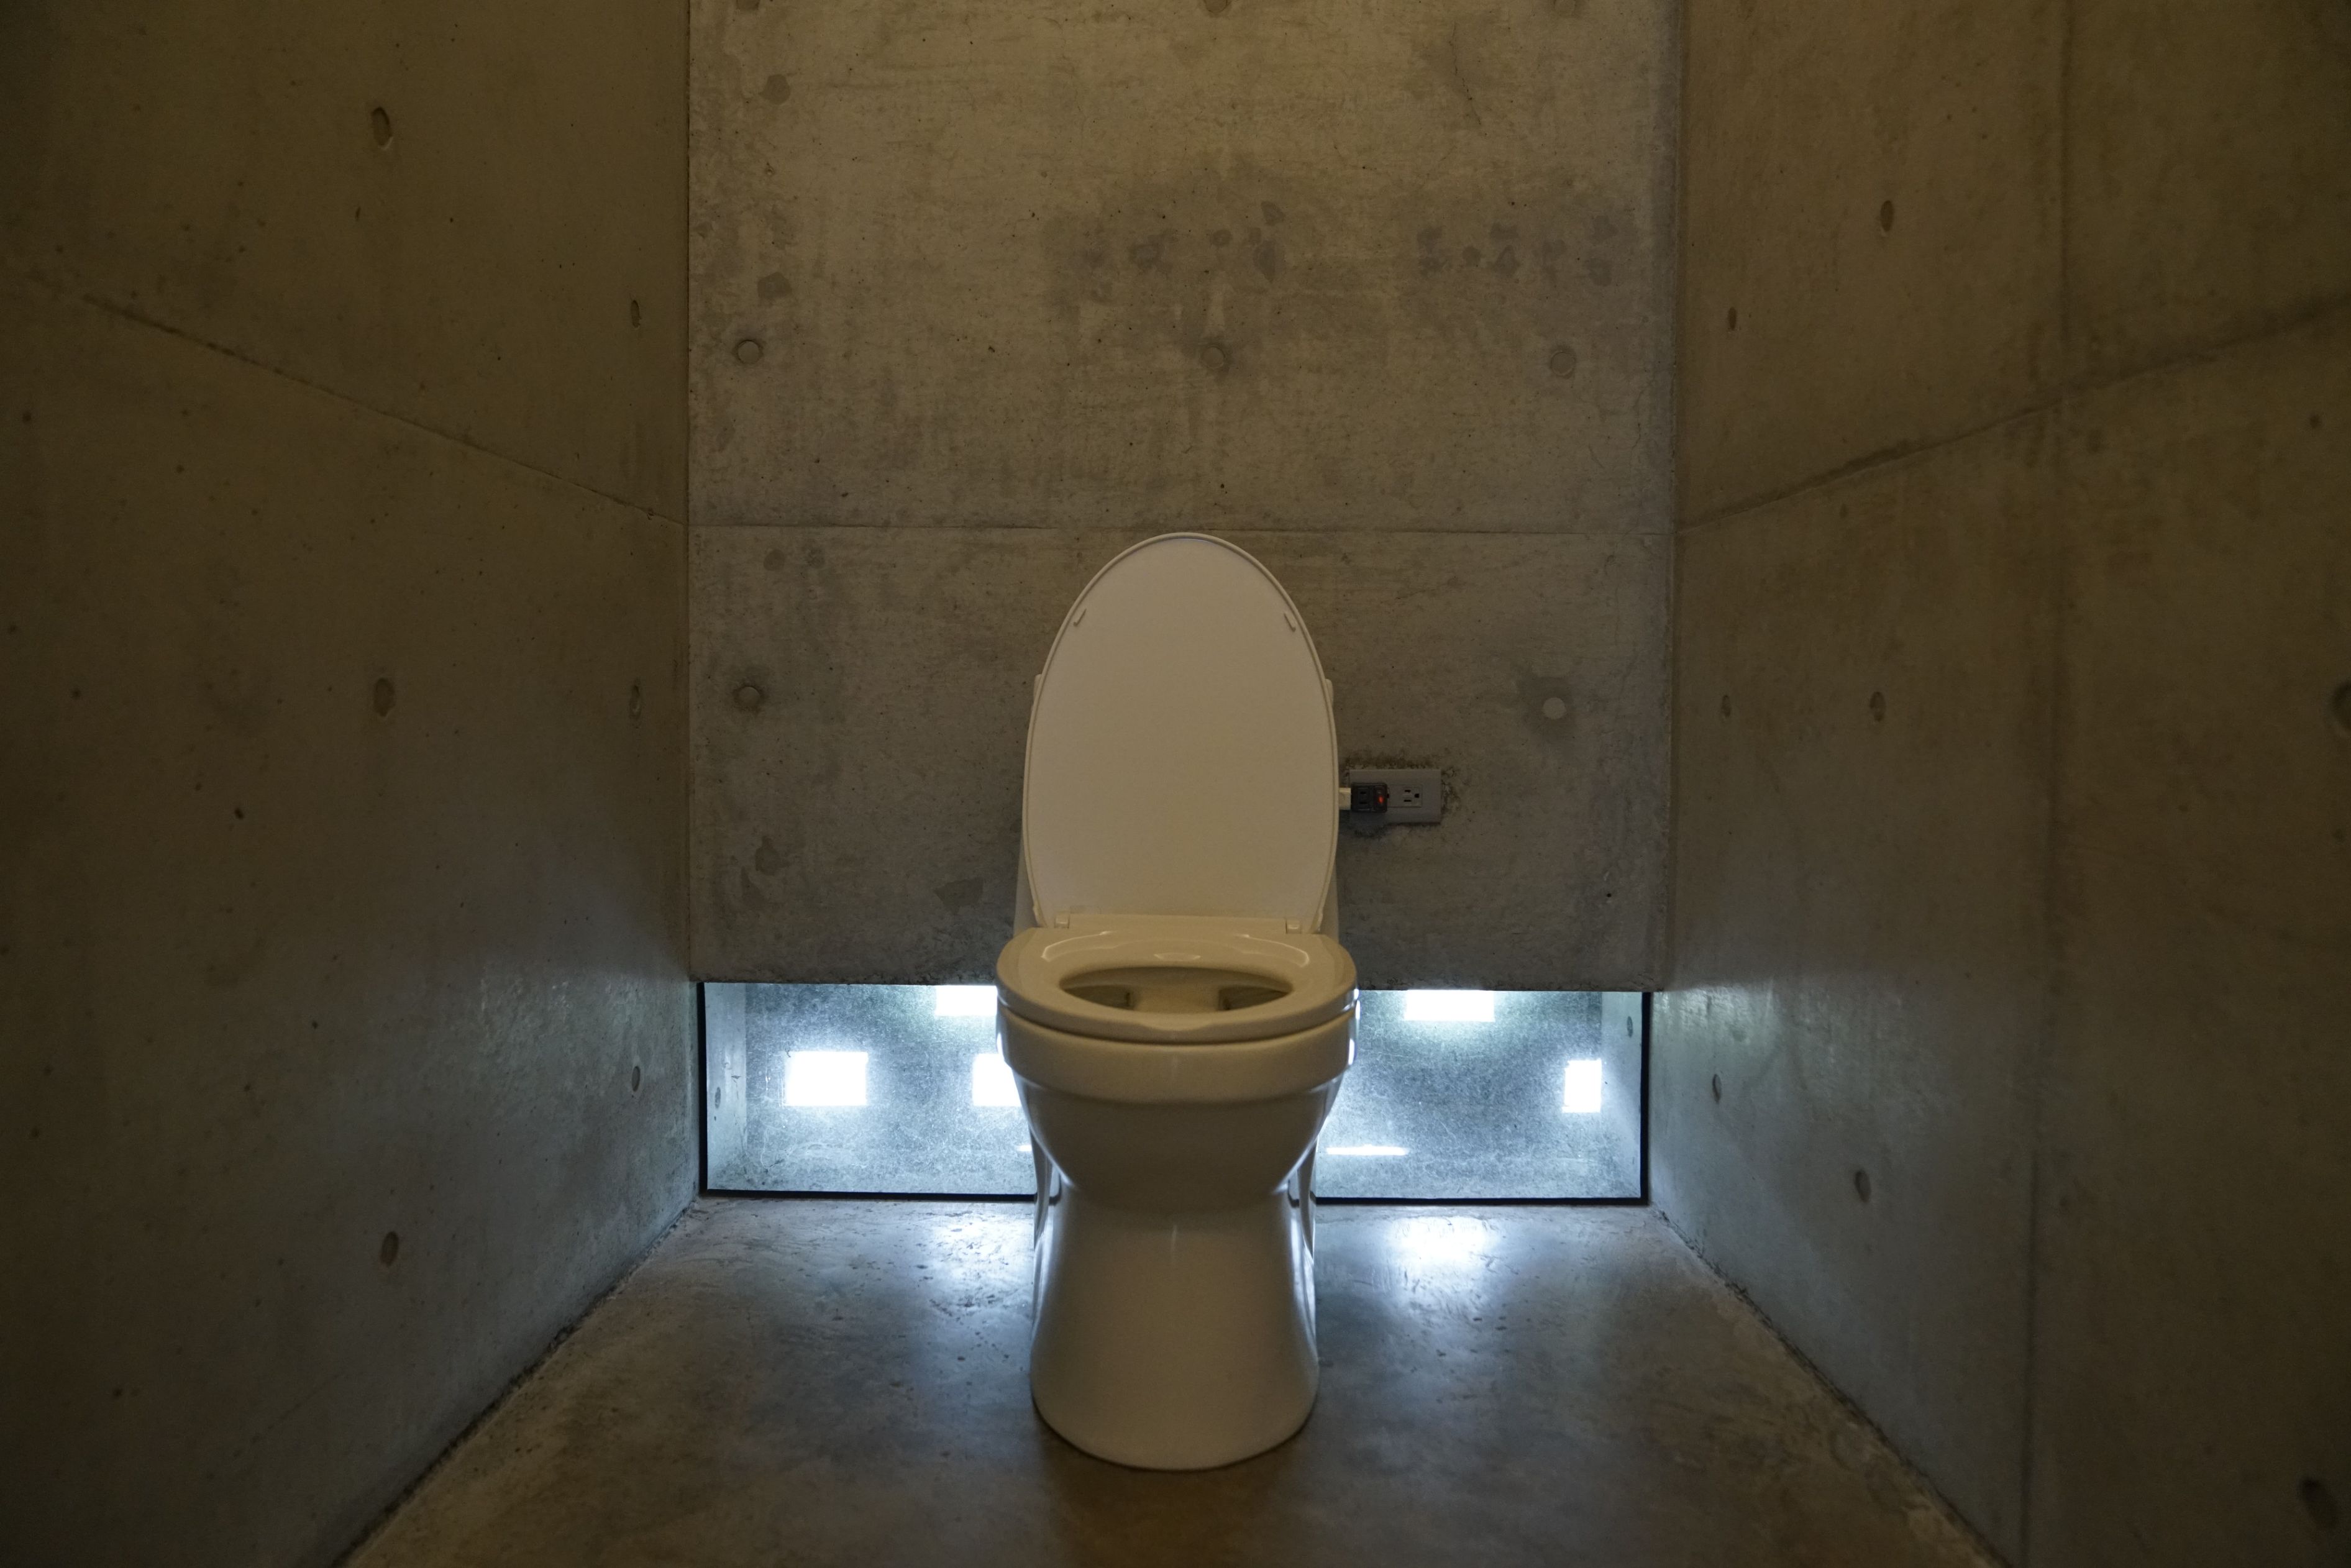 Liao Chien-Chung │ Toilet │ 40 × 75 × 60 cm │ FRP, kinetic sculpture, water │ 2017